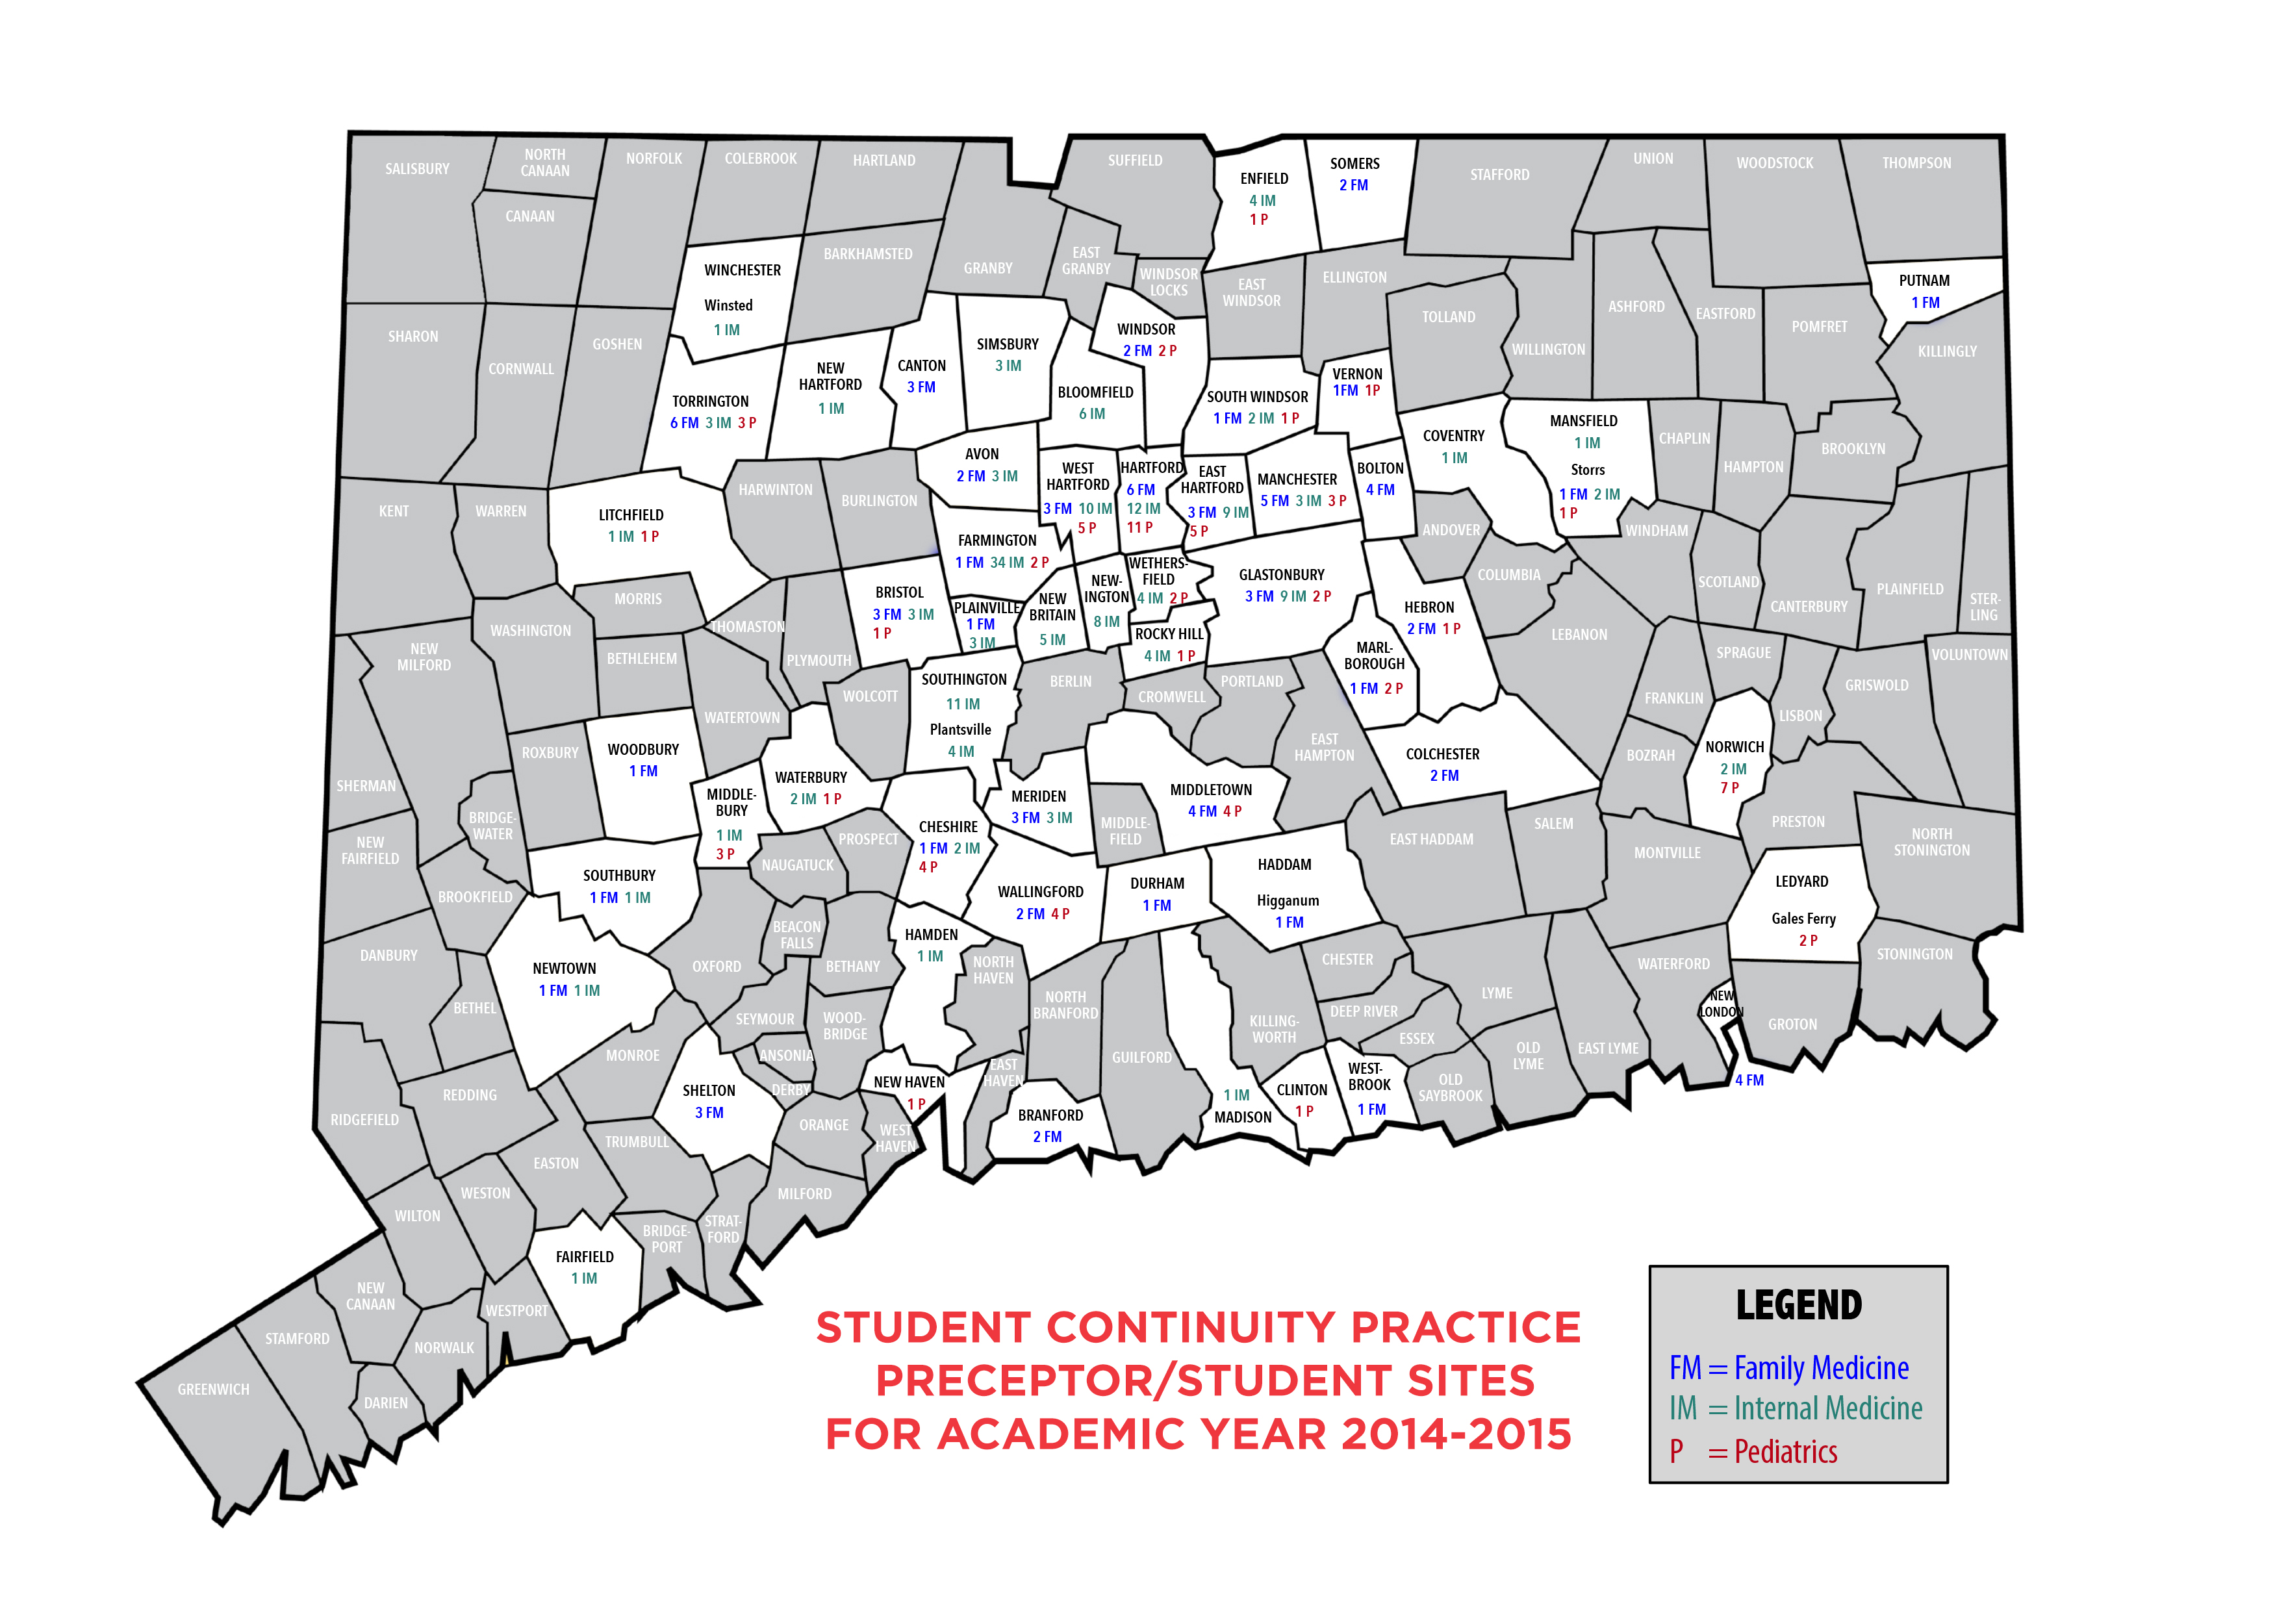 Student Continuity Practice Preceptor/Student Sites for Academic Year 2014-2015